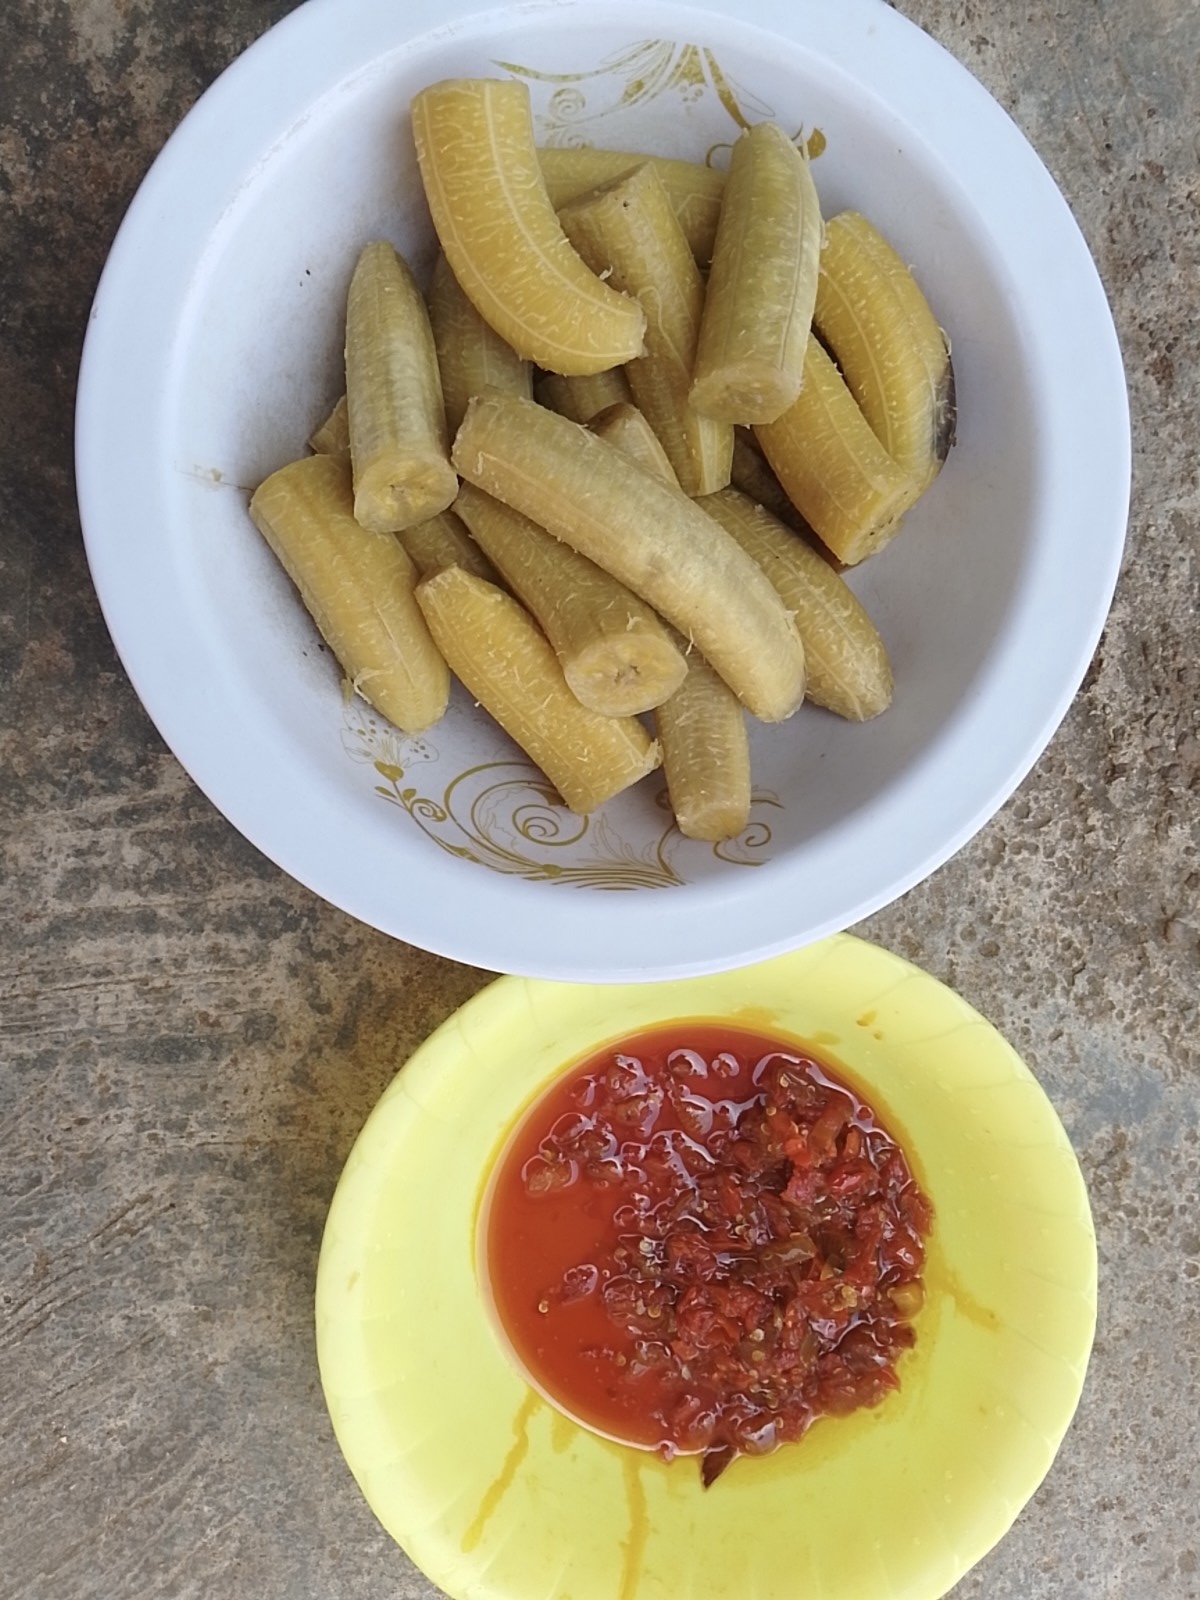 BOILED RIPE PLANTAIN AND PEPPER SAUCE